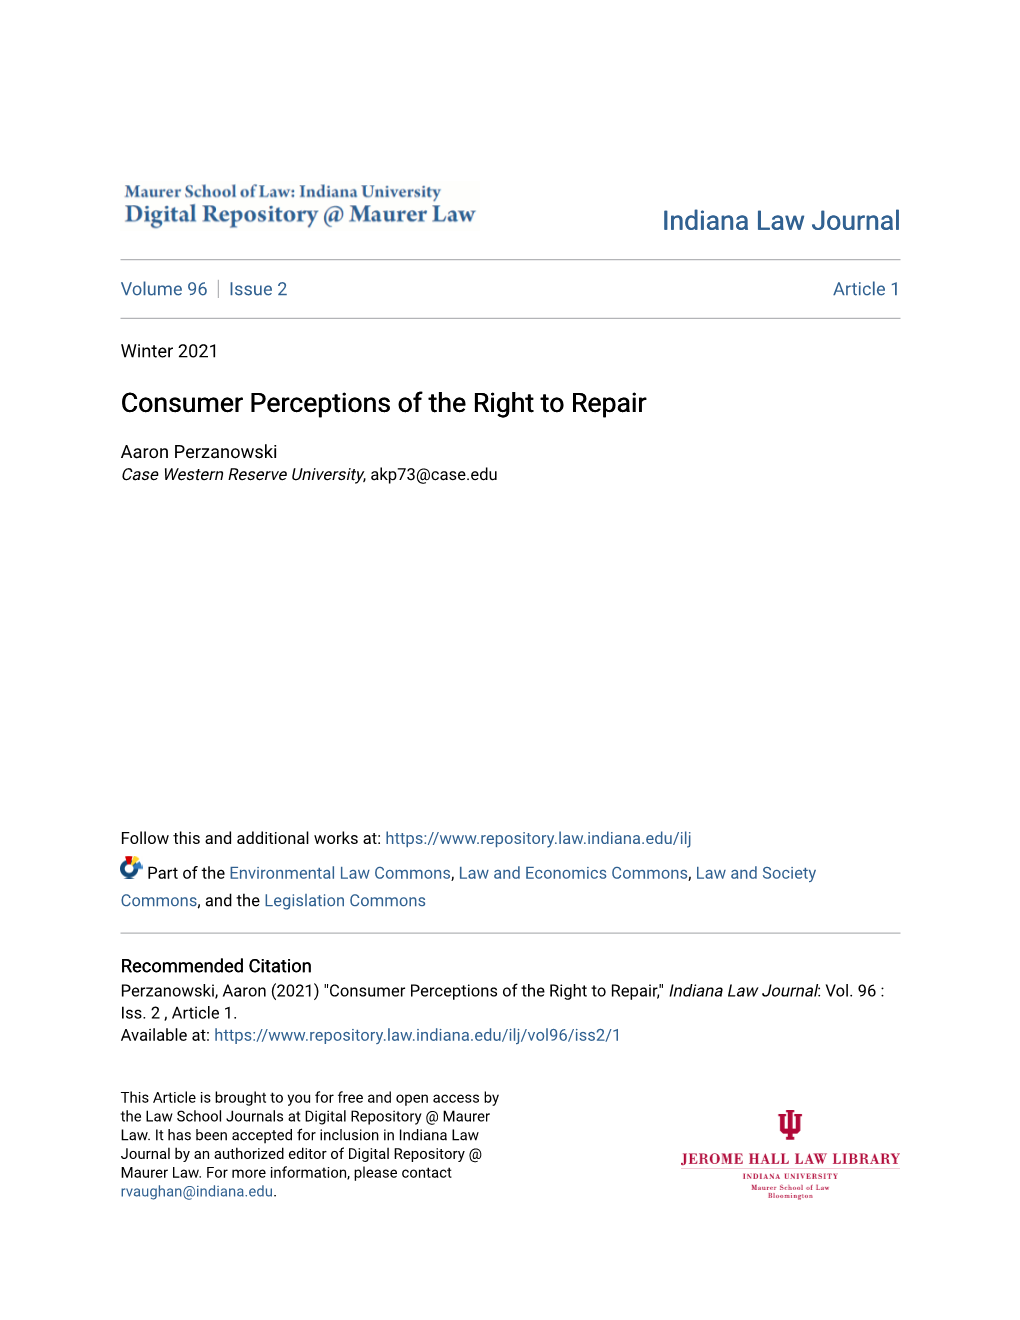 Consumer Perceptions of the Right to Repair